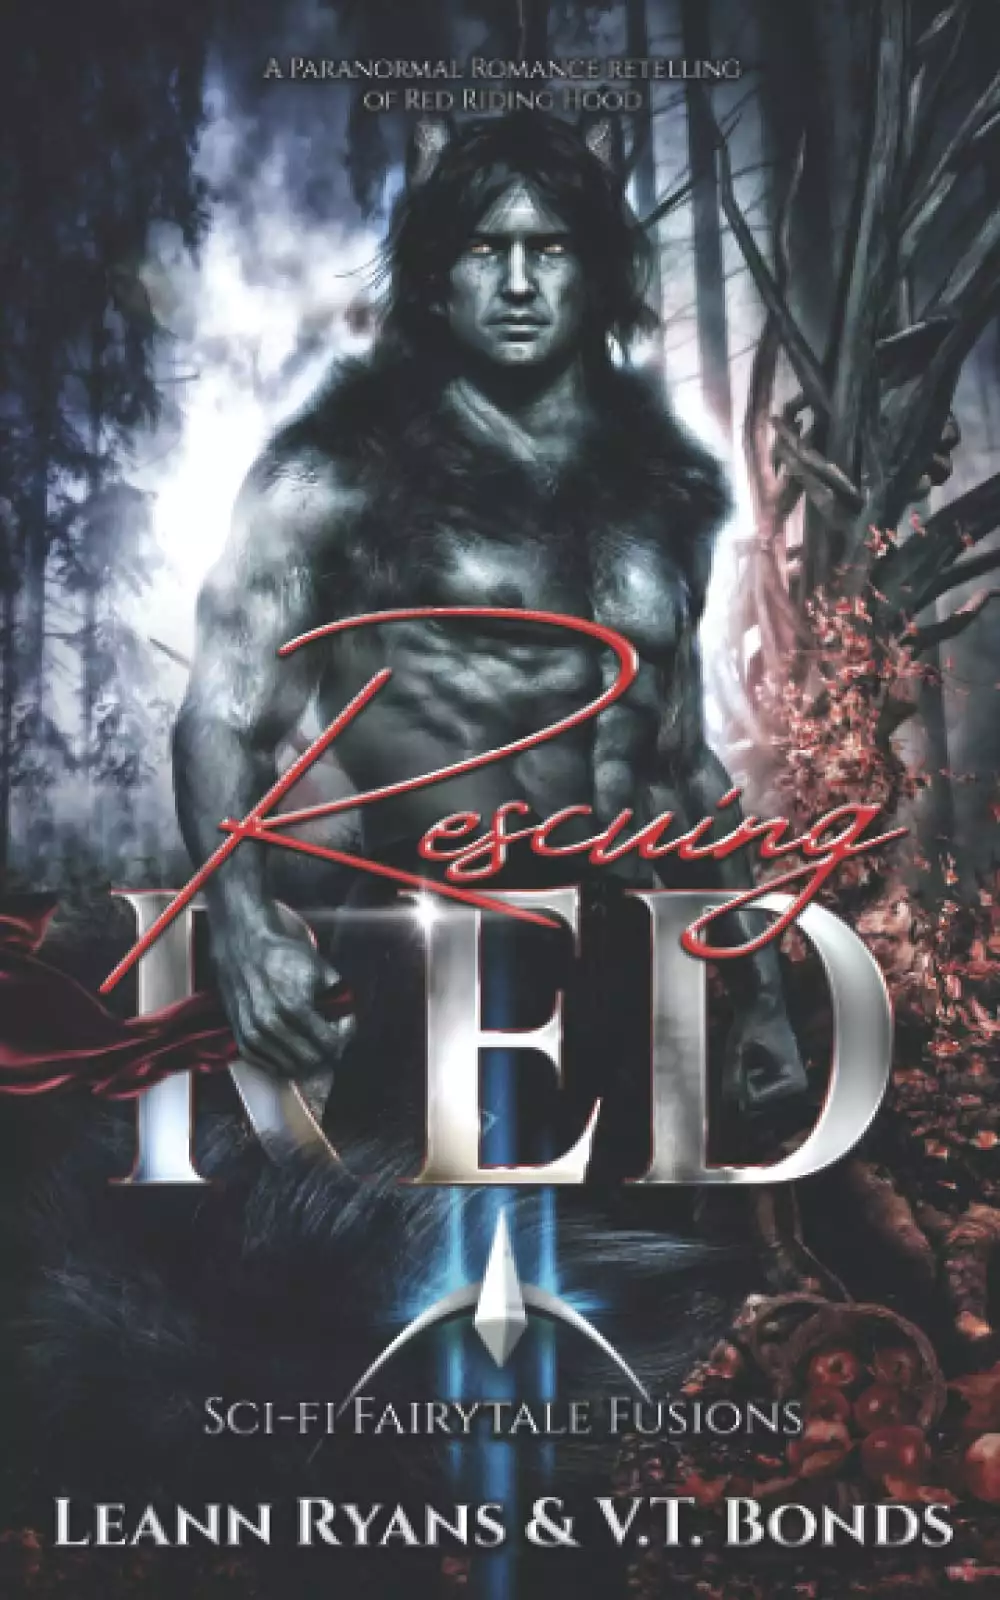 Rescuing Red: A Paranormal Romance retelling of Red Riding Hood